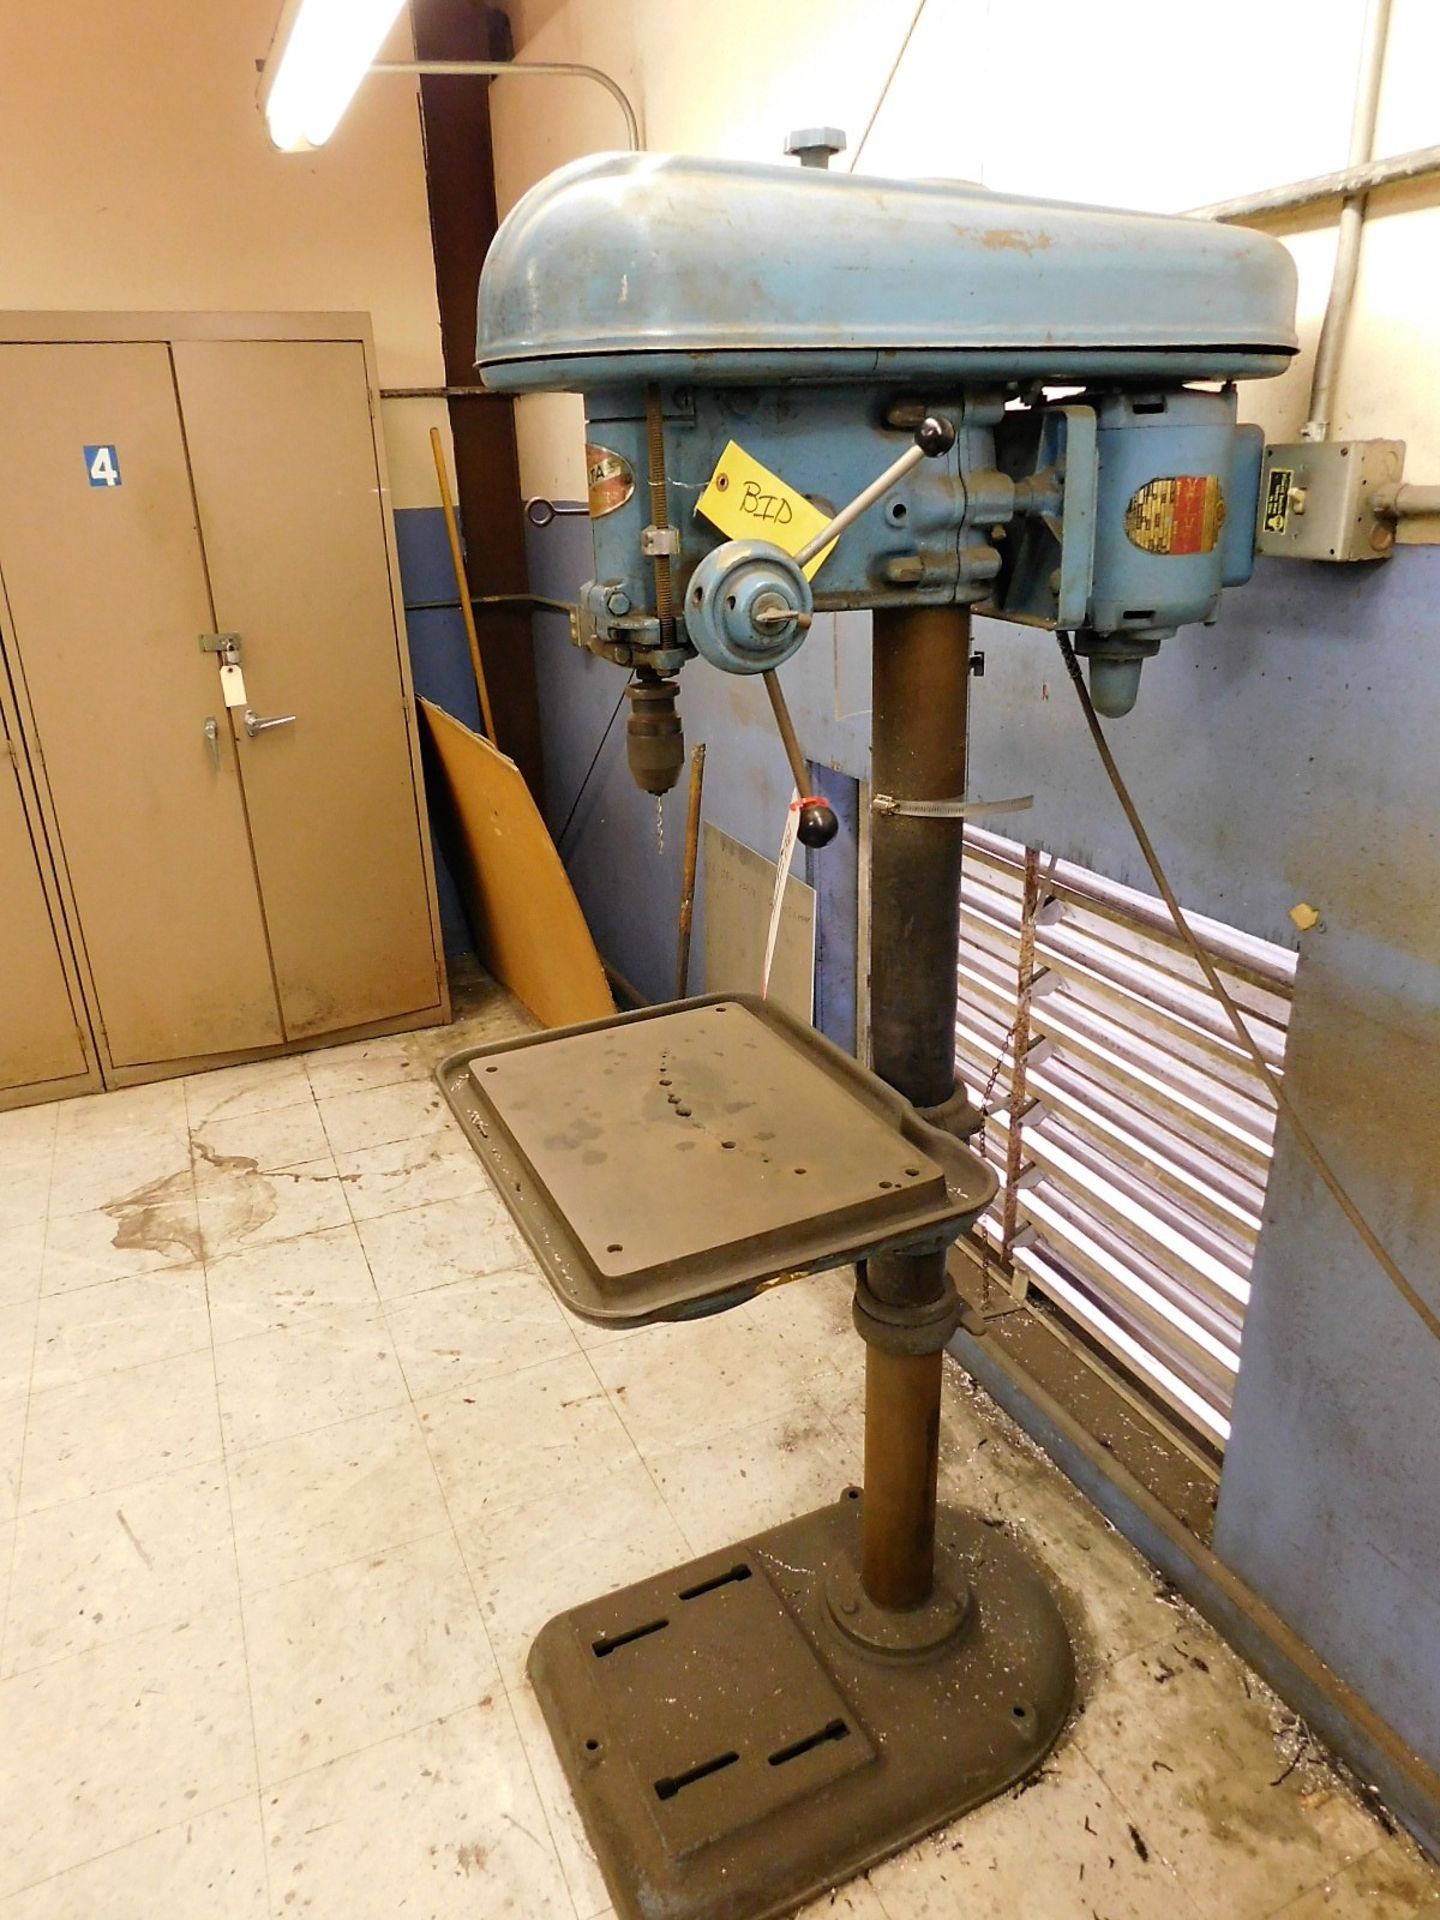 ROCKWELL DELTA 17" DRILL PRESS, S/N 126-2073, FLOOR STAND, SPEED CHUCK, VARIABLE SPEED - Image 2 of 5